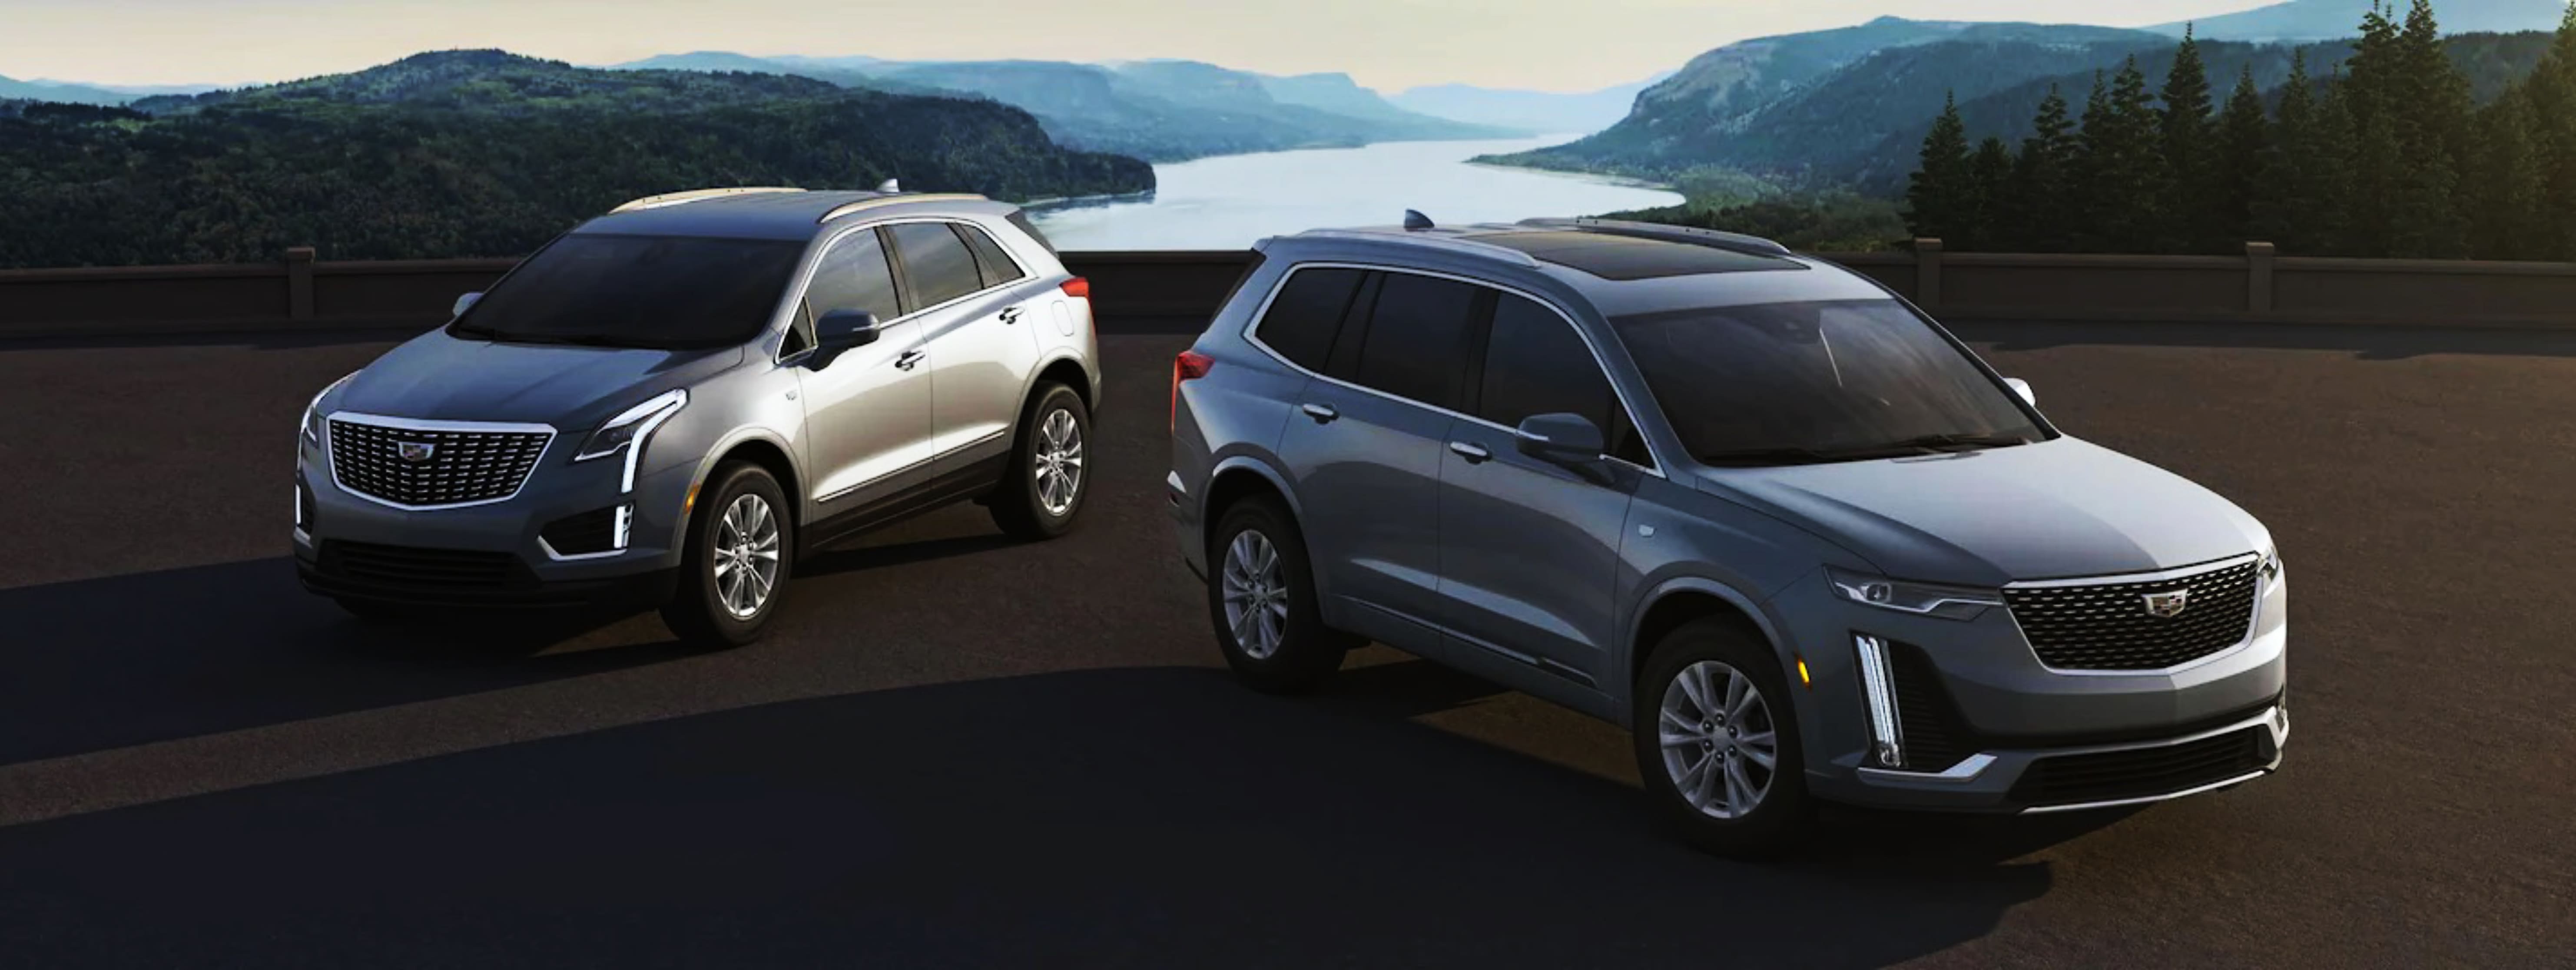 If you're looking for new or used Cadillac SUVs for sale in Murfreesboro, come to Cadillac of Murfreesboro. We have various models and makes, so stop by today.